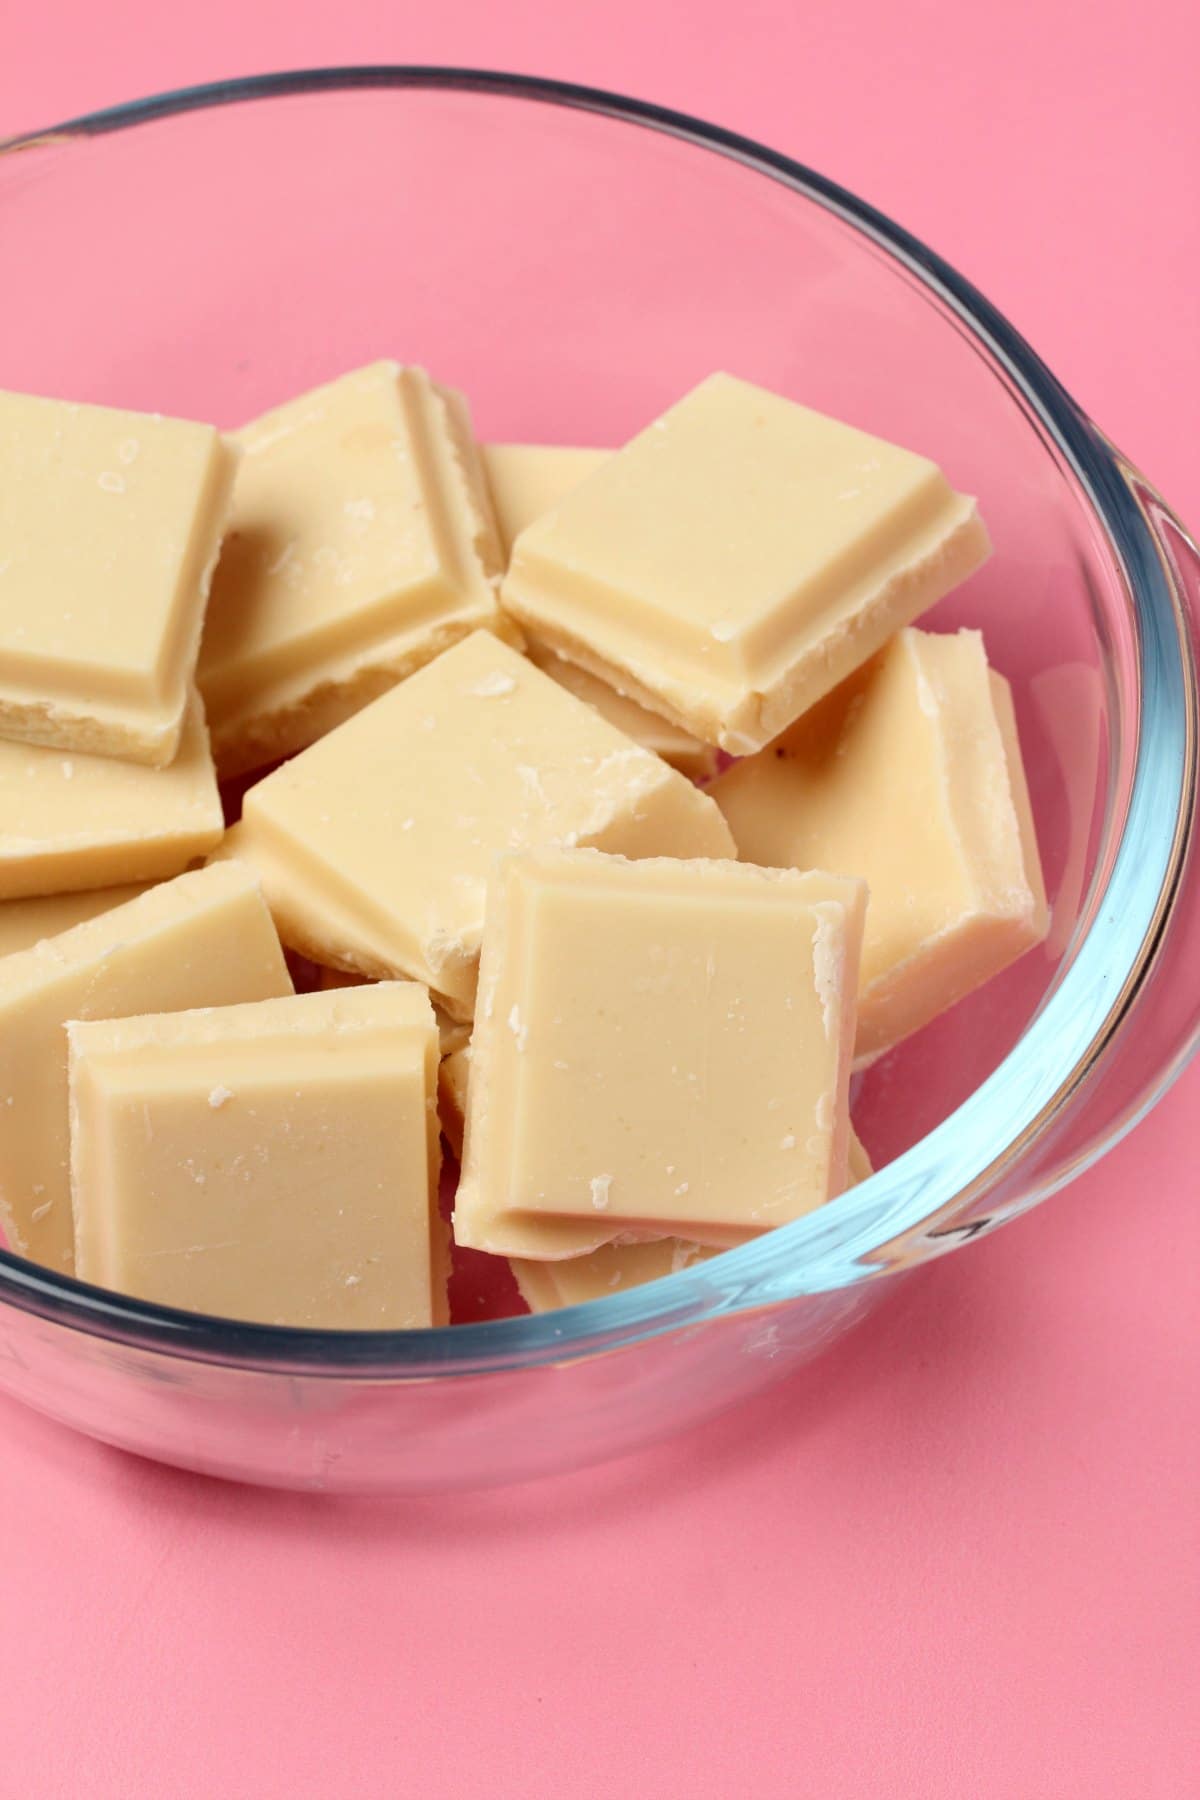 Vegan white chocolate in a glass microwave safe bowl.